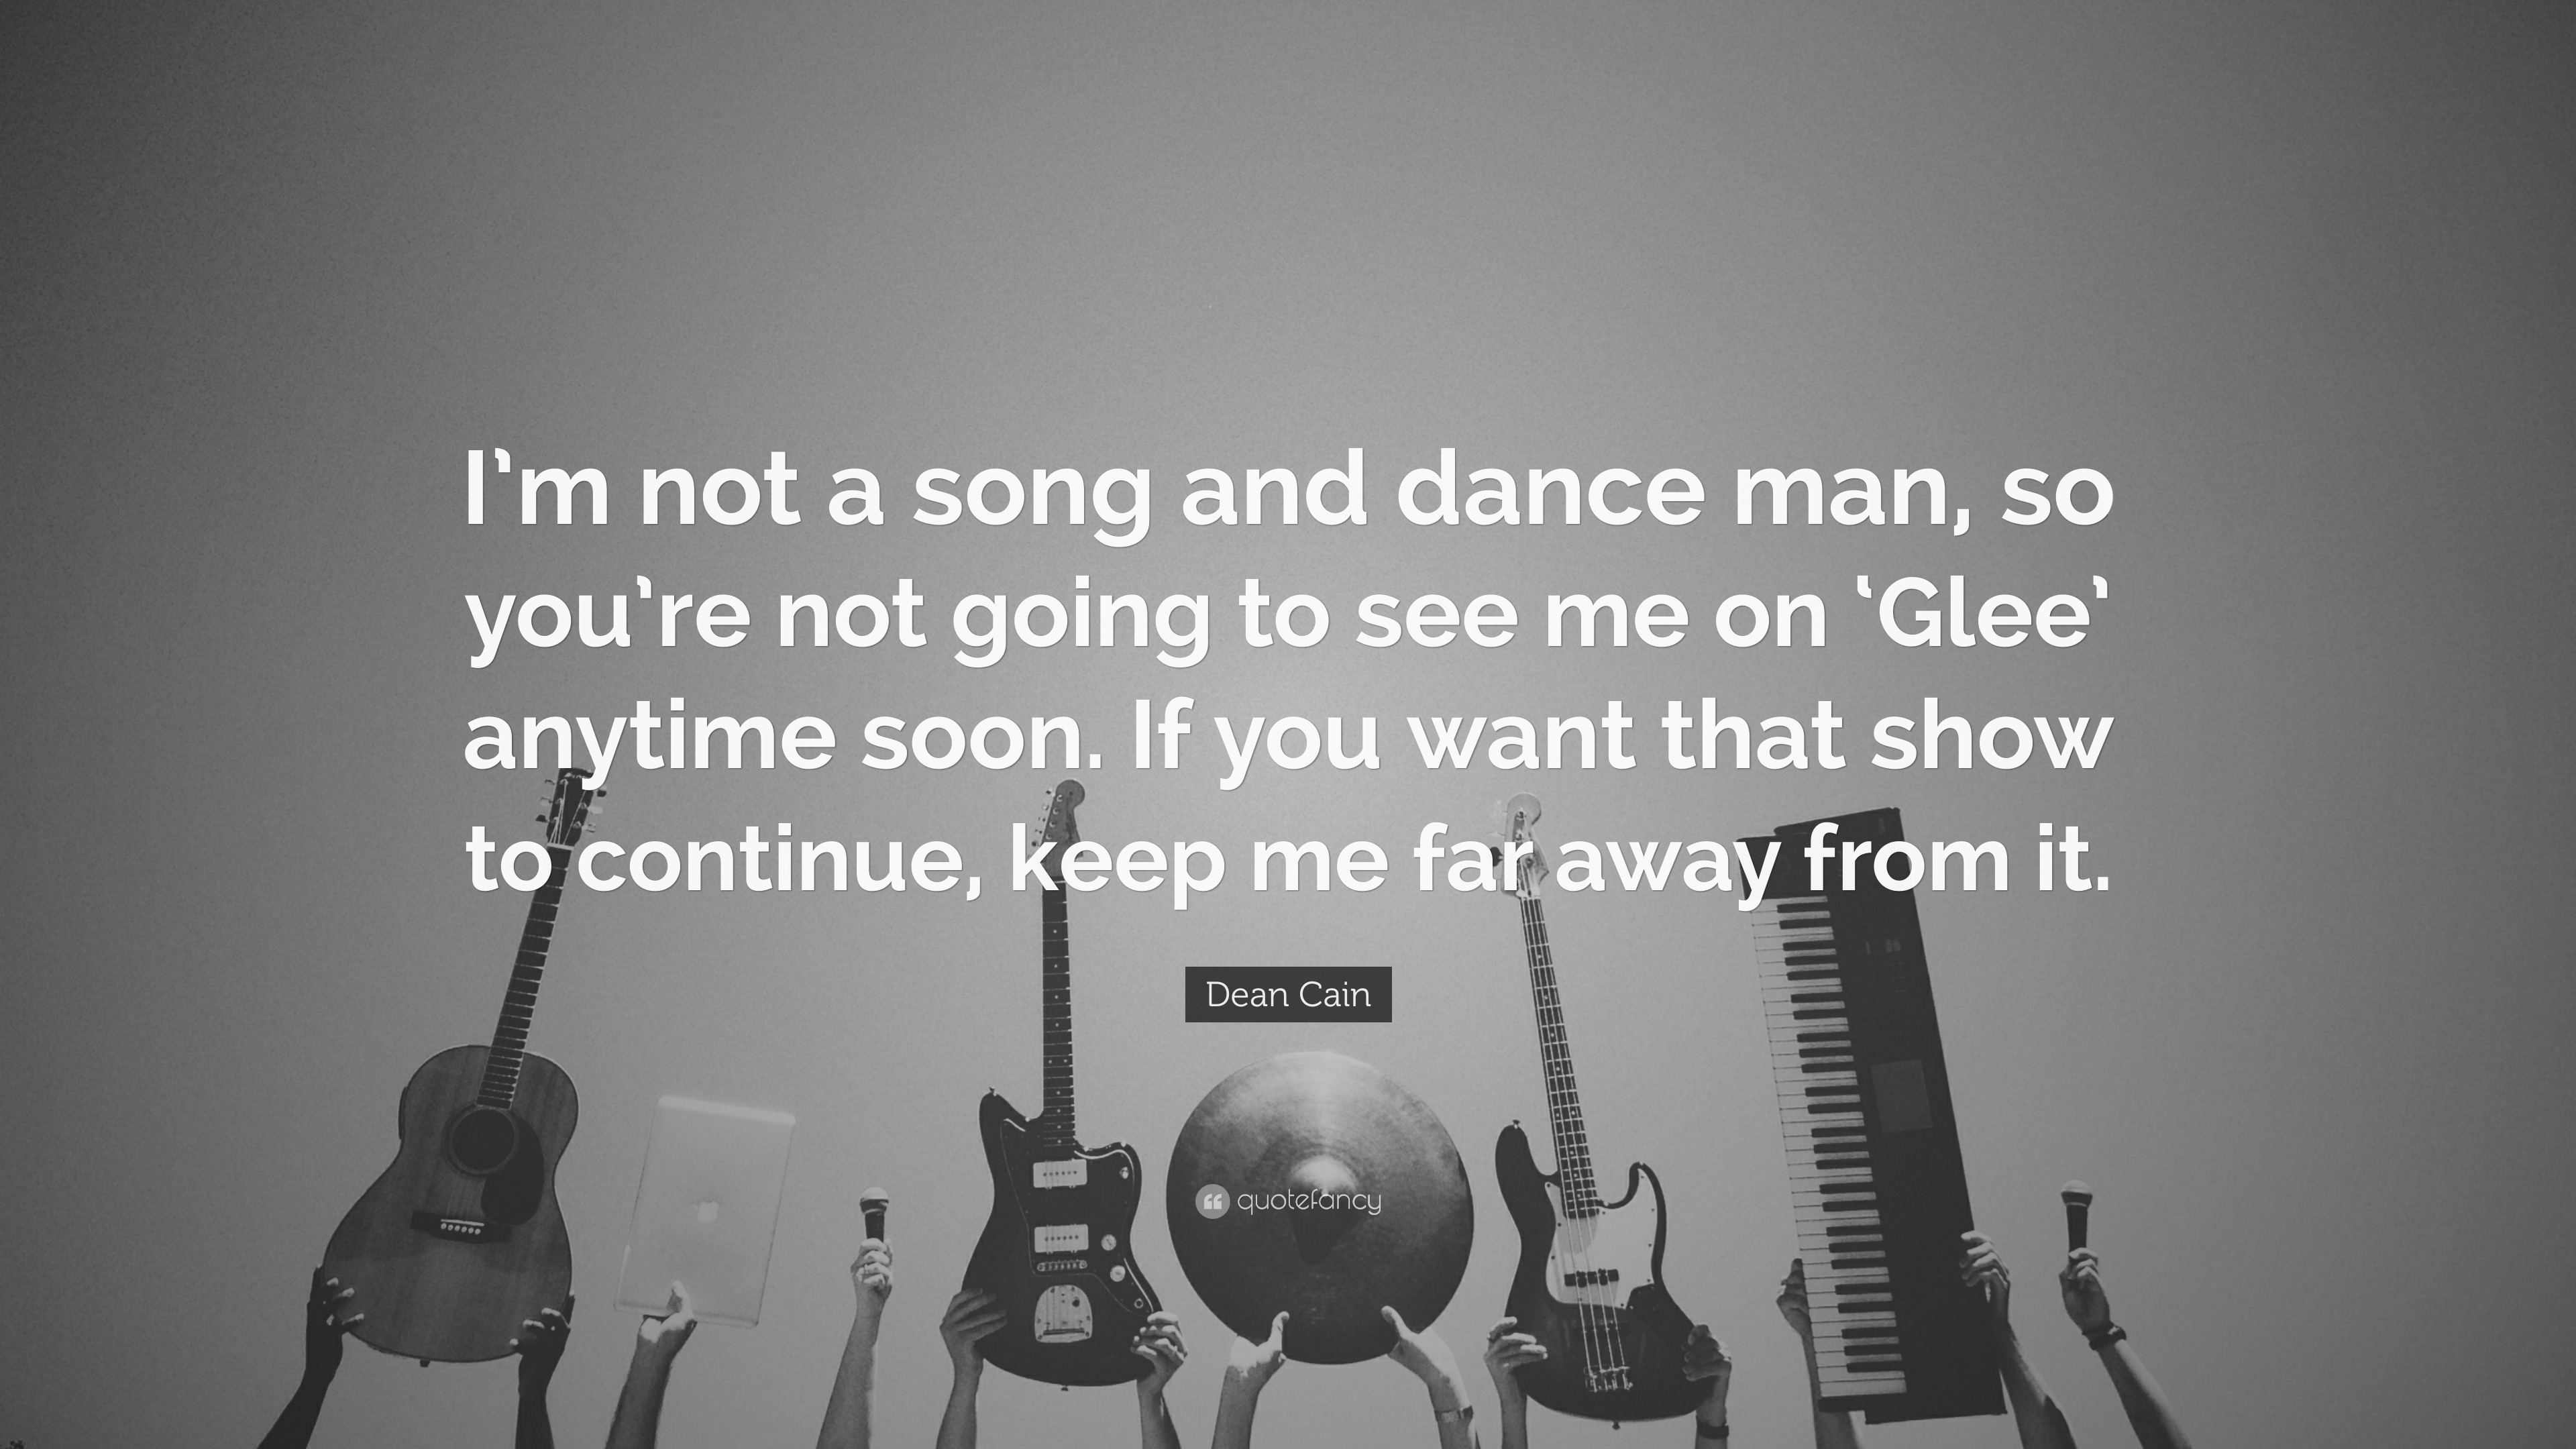 dance with me one more time #lyrics #spe